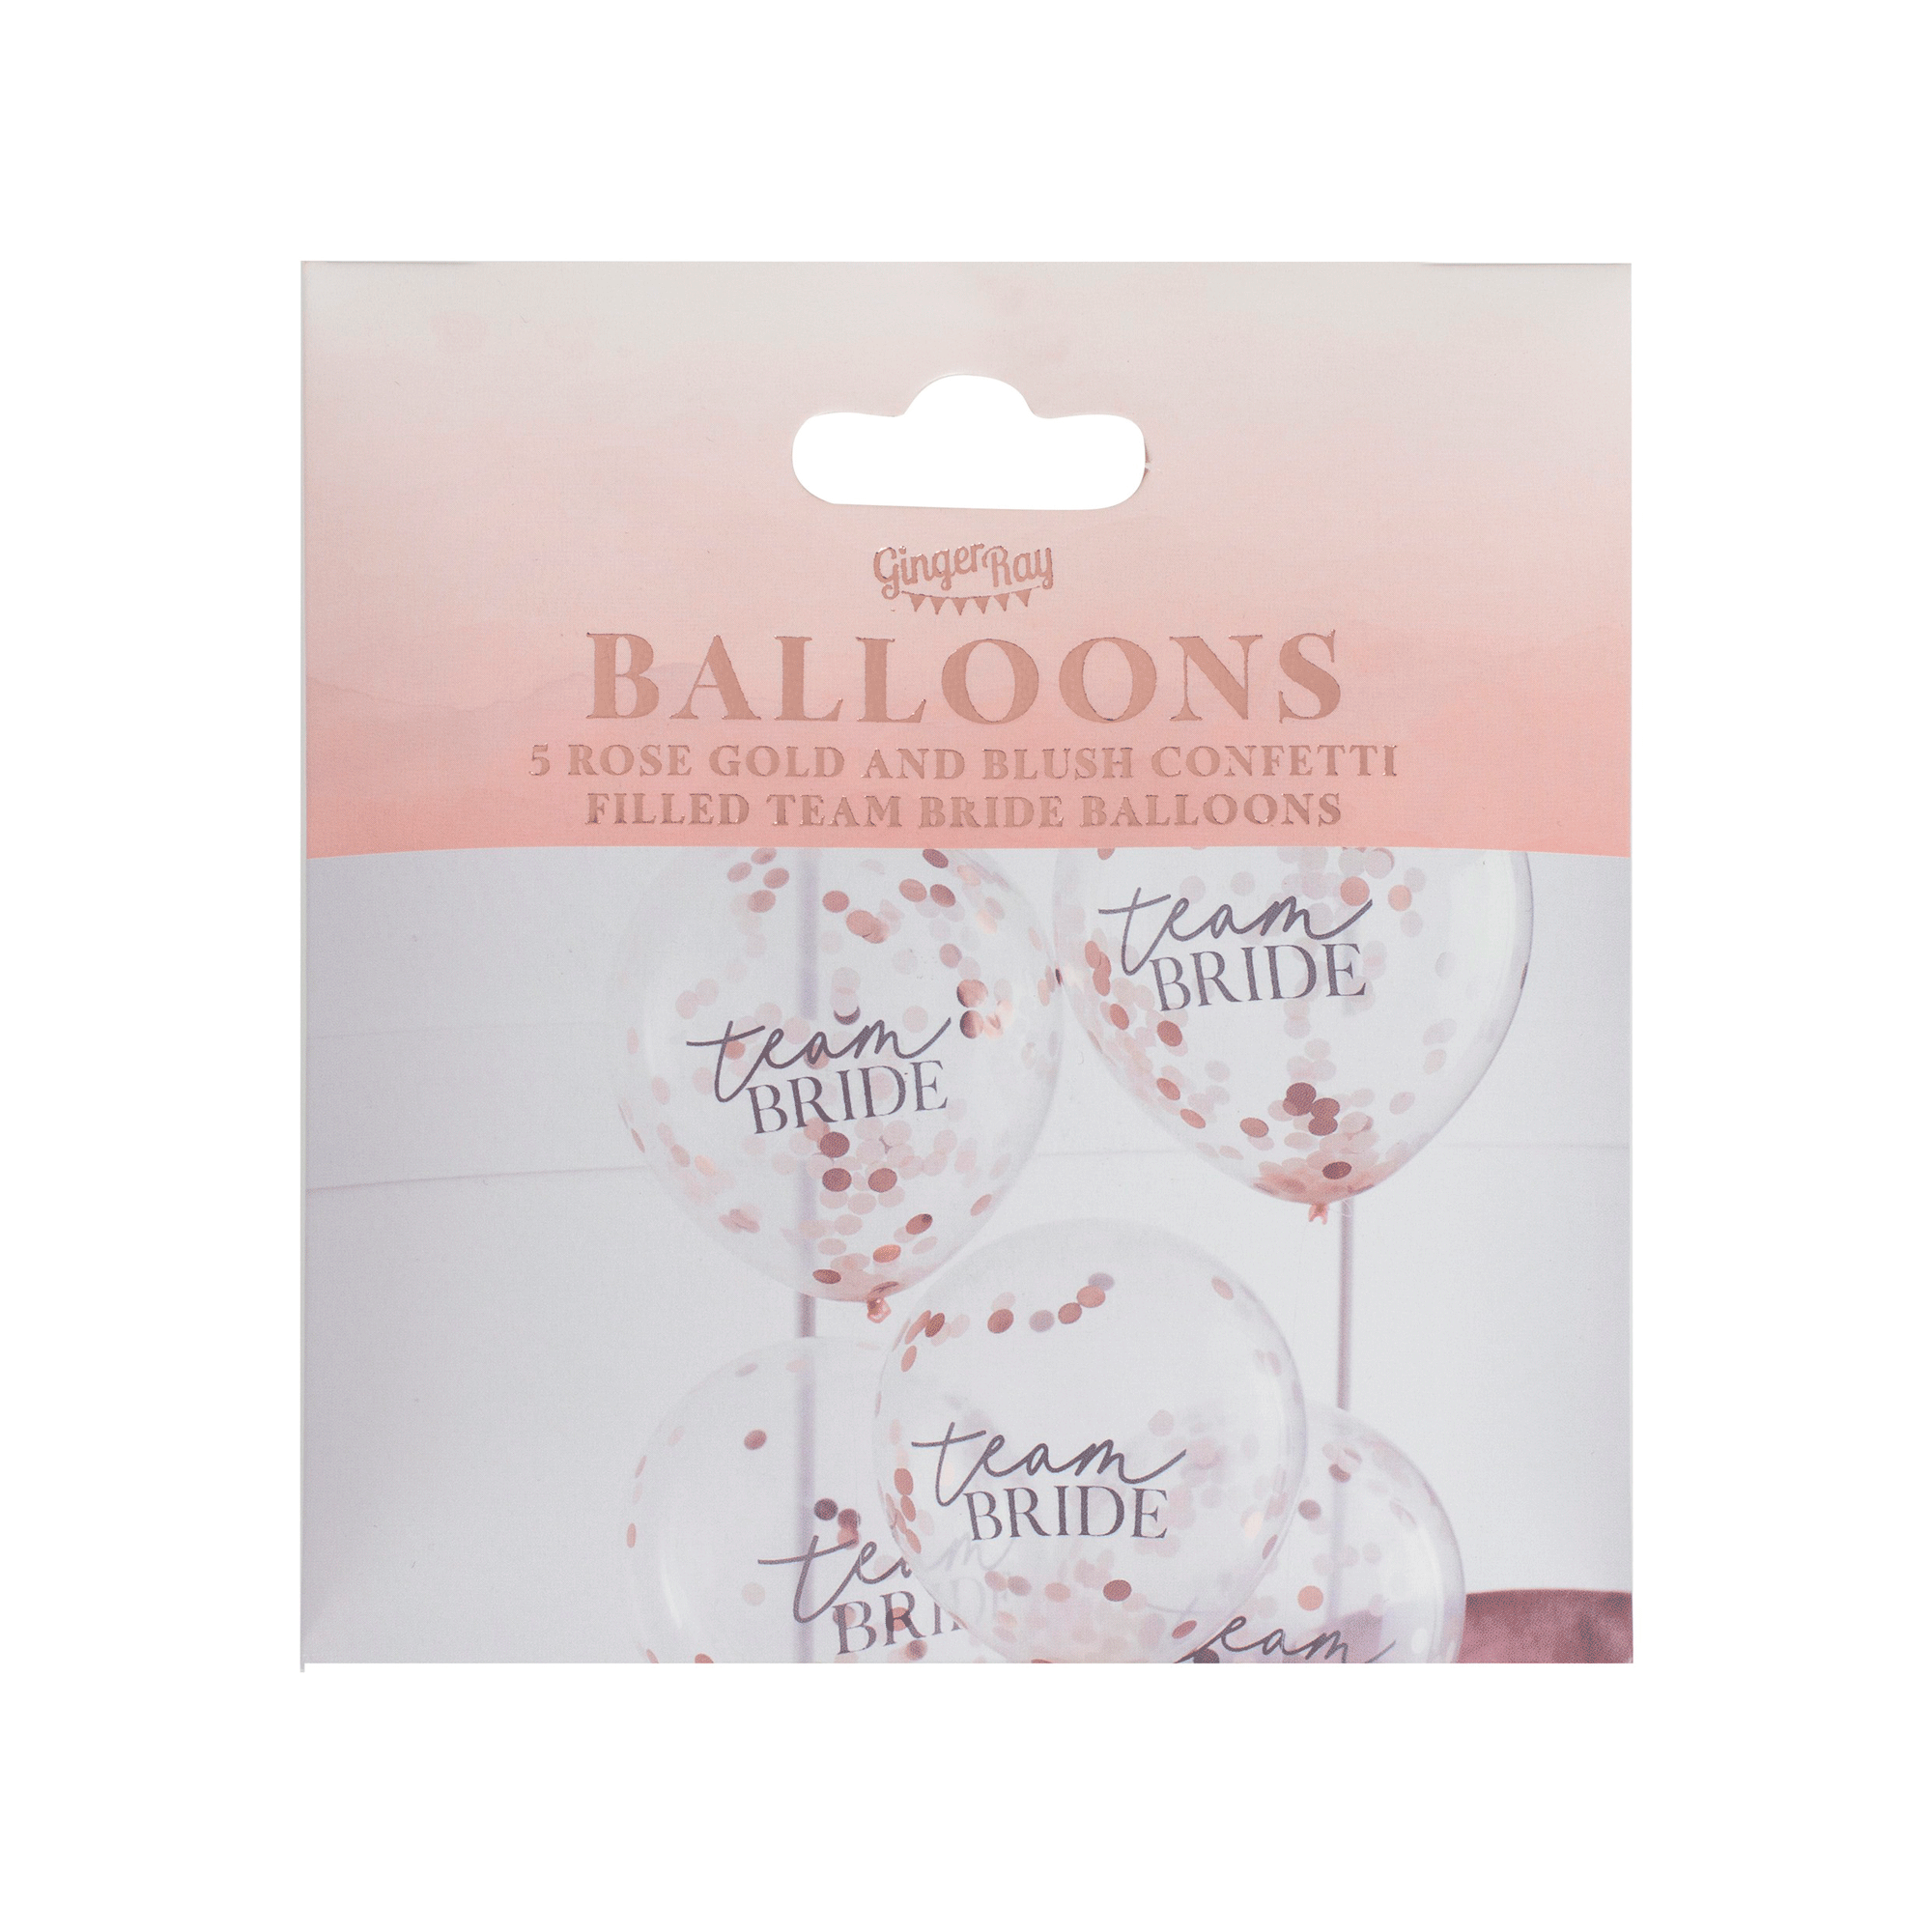 Confetti Filled Team Bride Hen Party Balloons